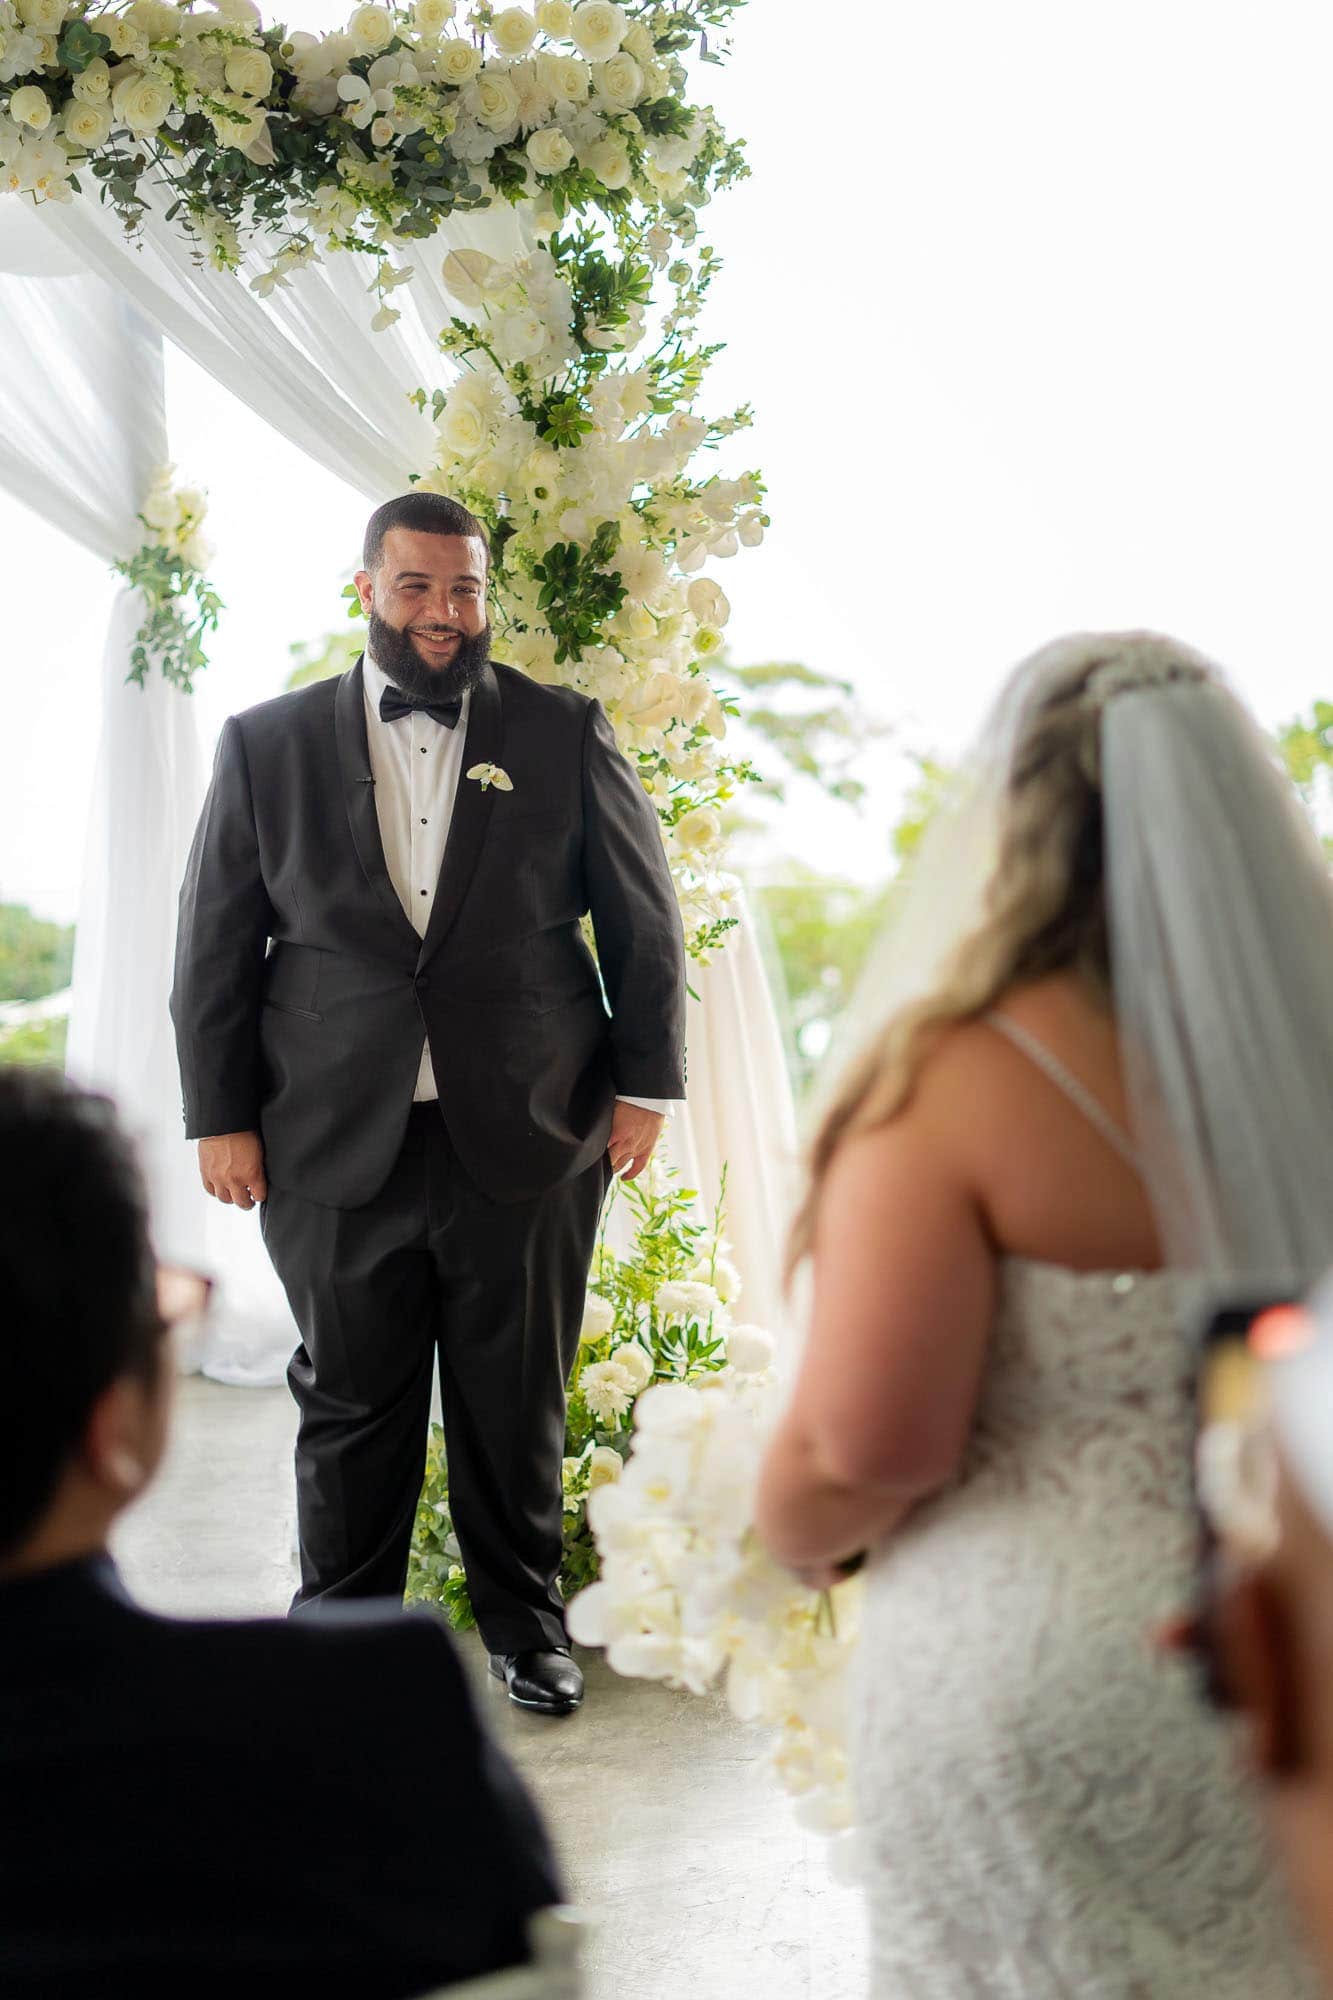 Groom smiles as he sees his bride approach